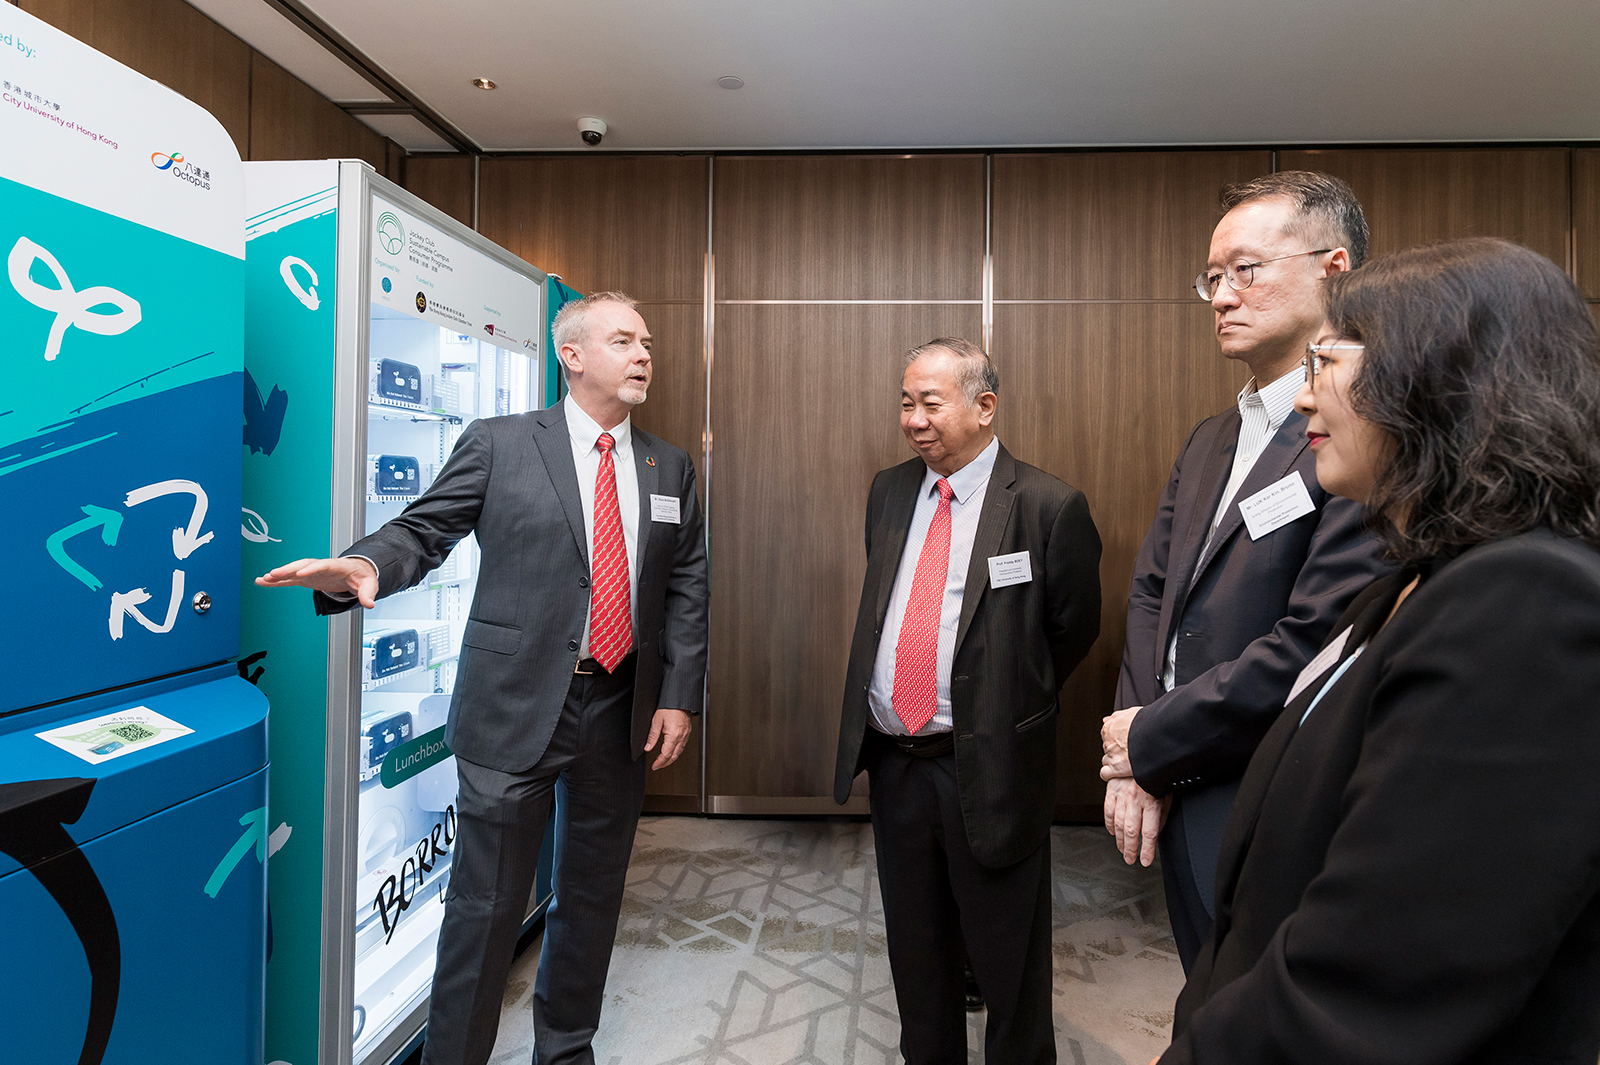 Professor Bookhart introduces the lunchbox lending system to President Boey, Mr Luk and Ms Brenda Lai Fung-ming, Director of Facilities Management at CityU and Co-Chair of Executive Committee of the Hong Kong Sustainable Campus Consortium.